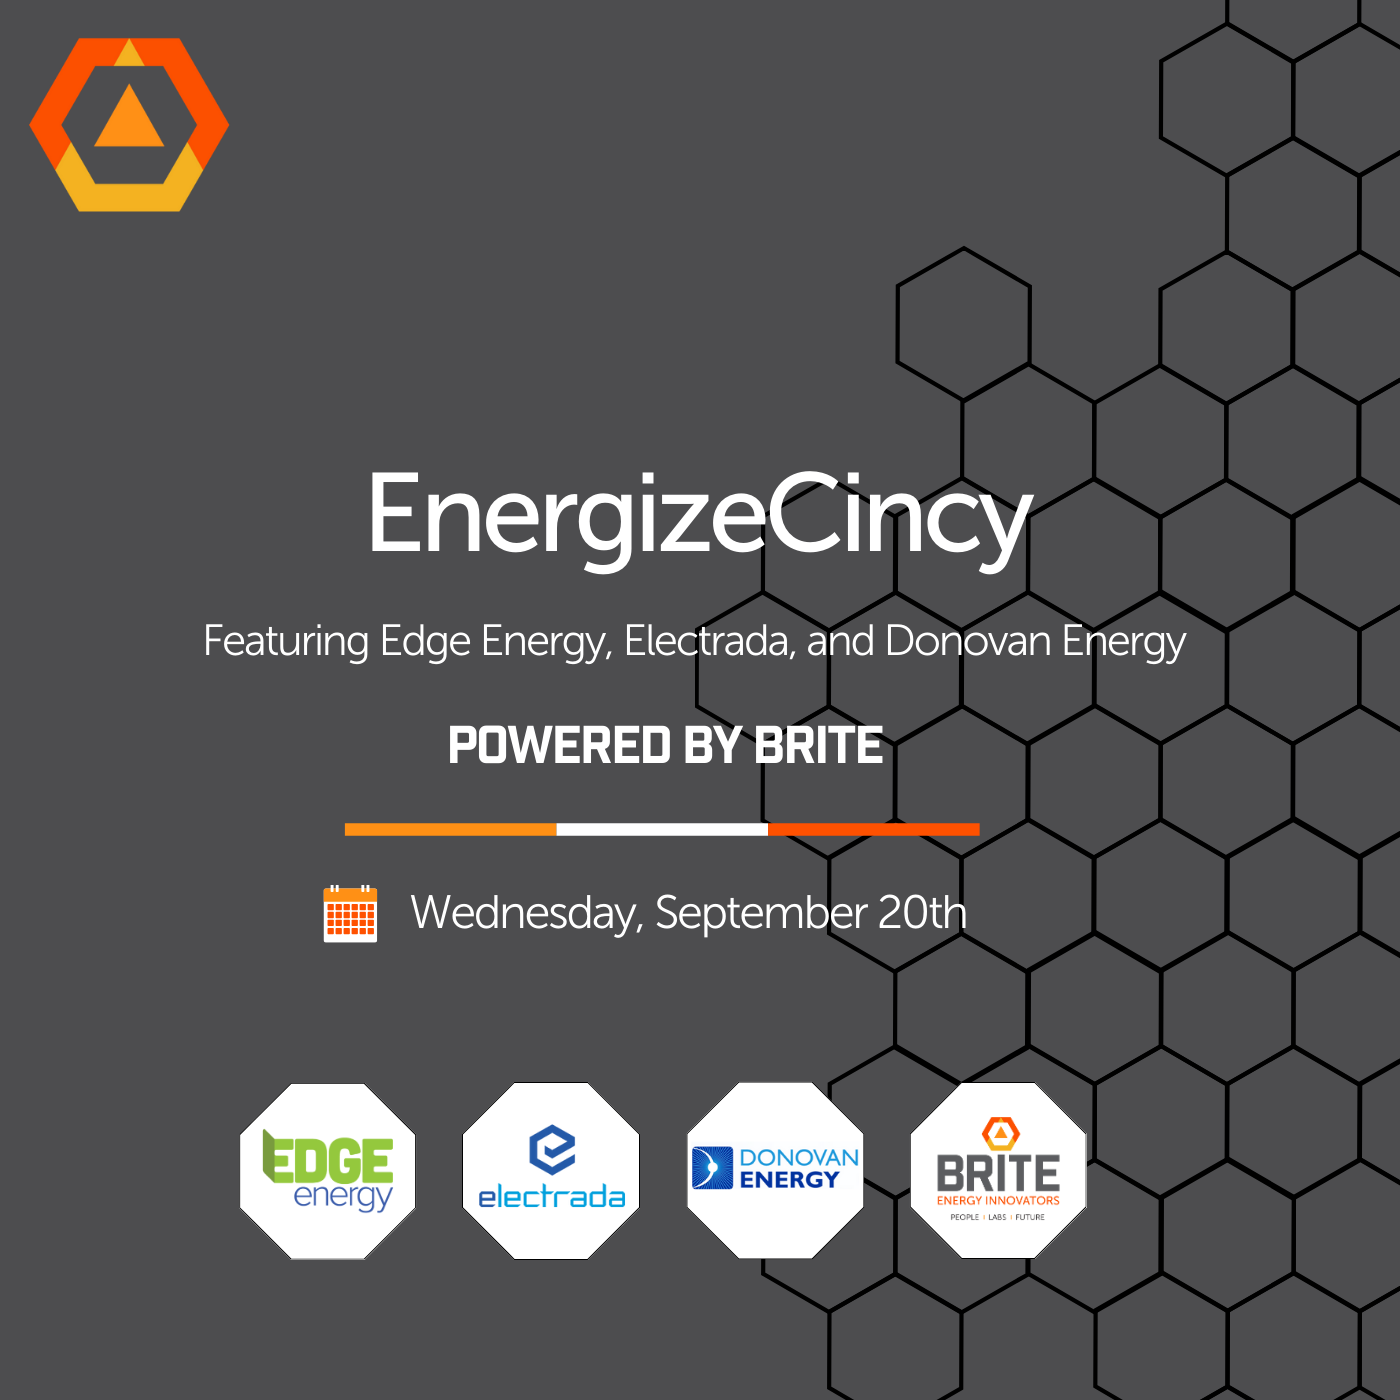 Energize Cincy, an event powered by BRITE